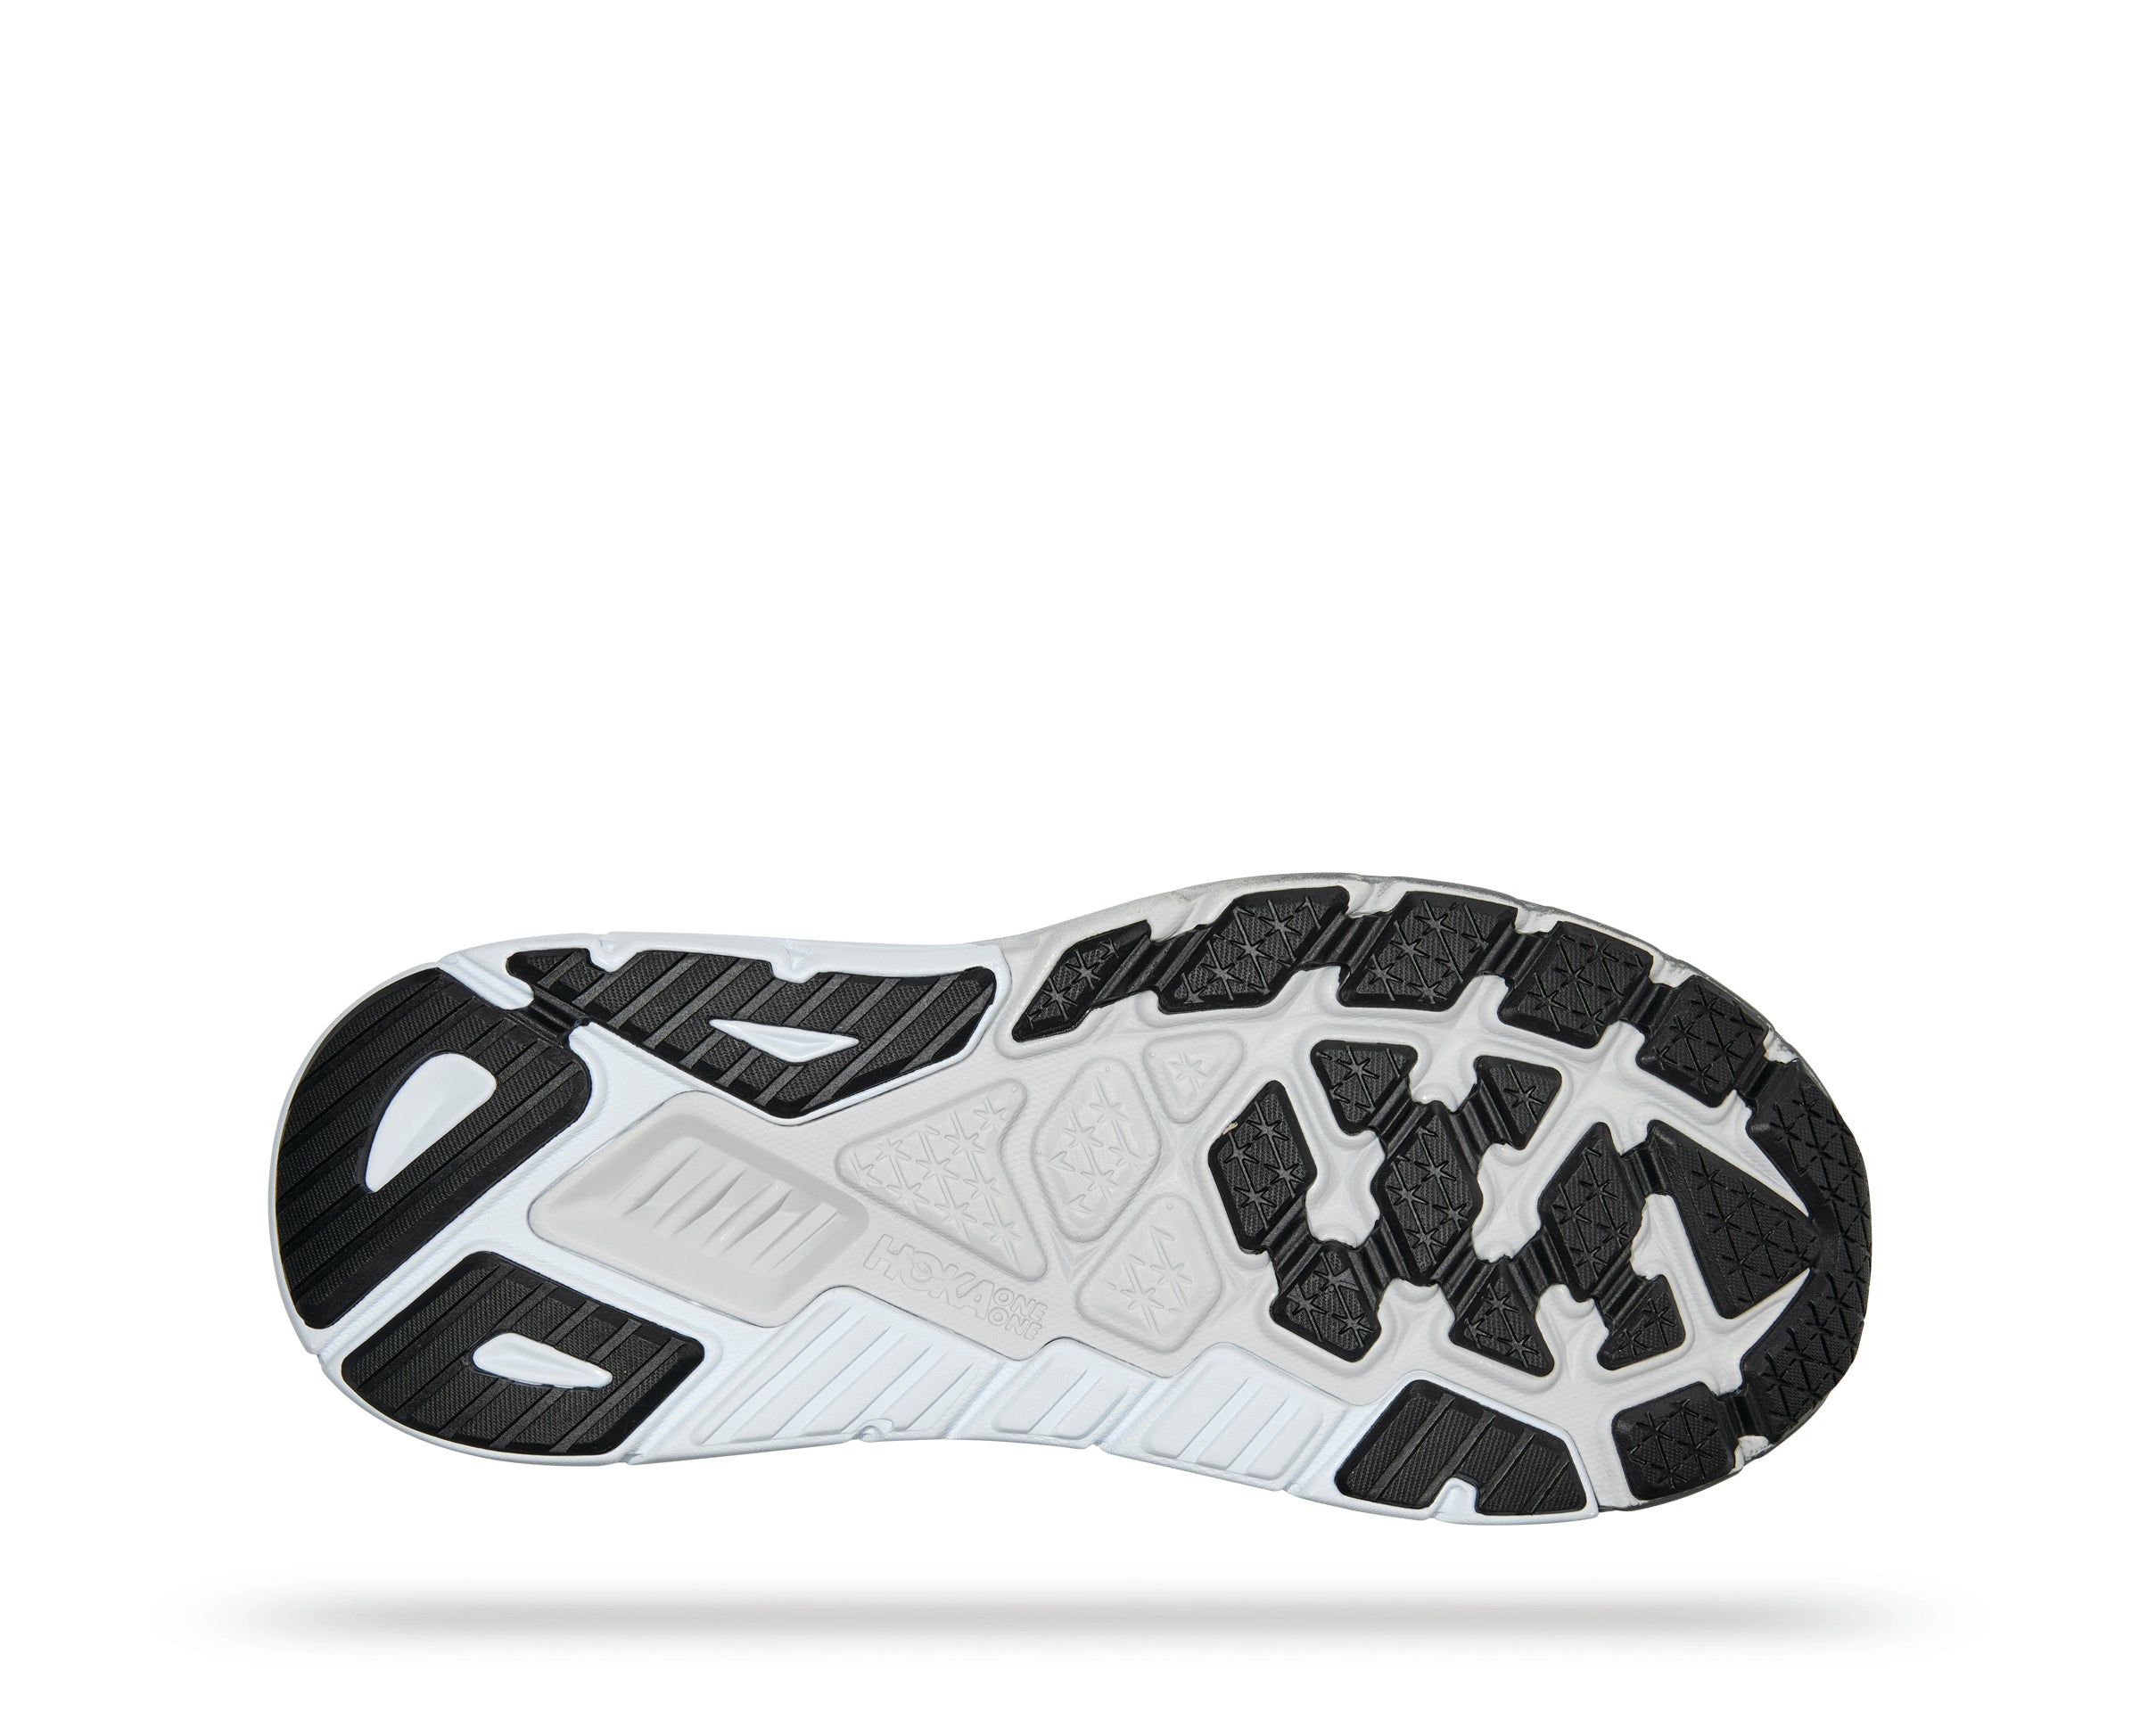 This image is of the outsole of the Hoka Men's Arahi 6 running shoe